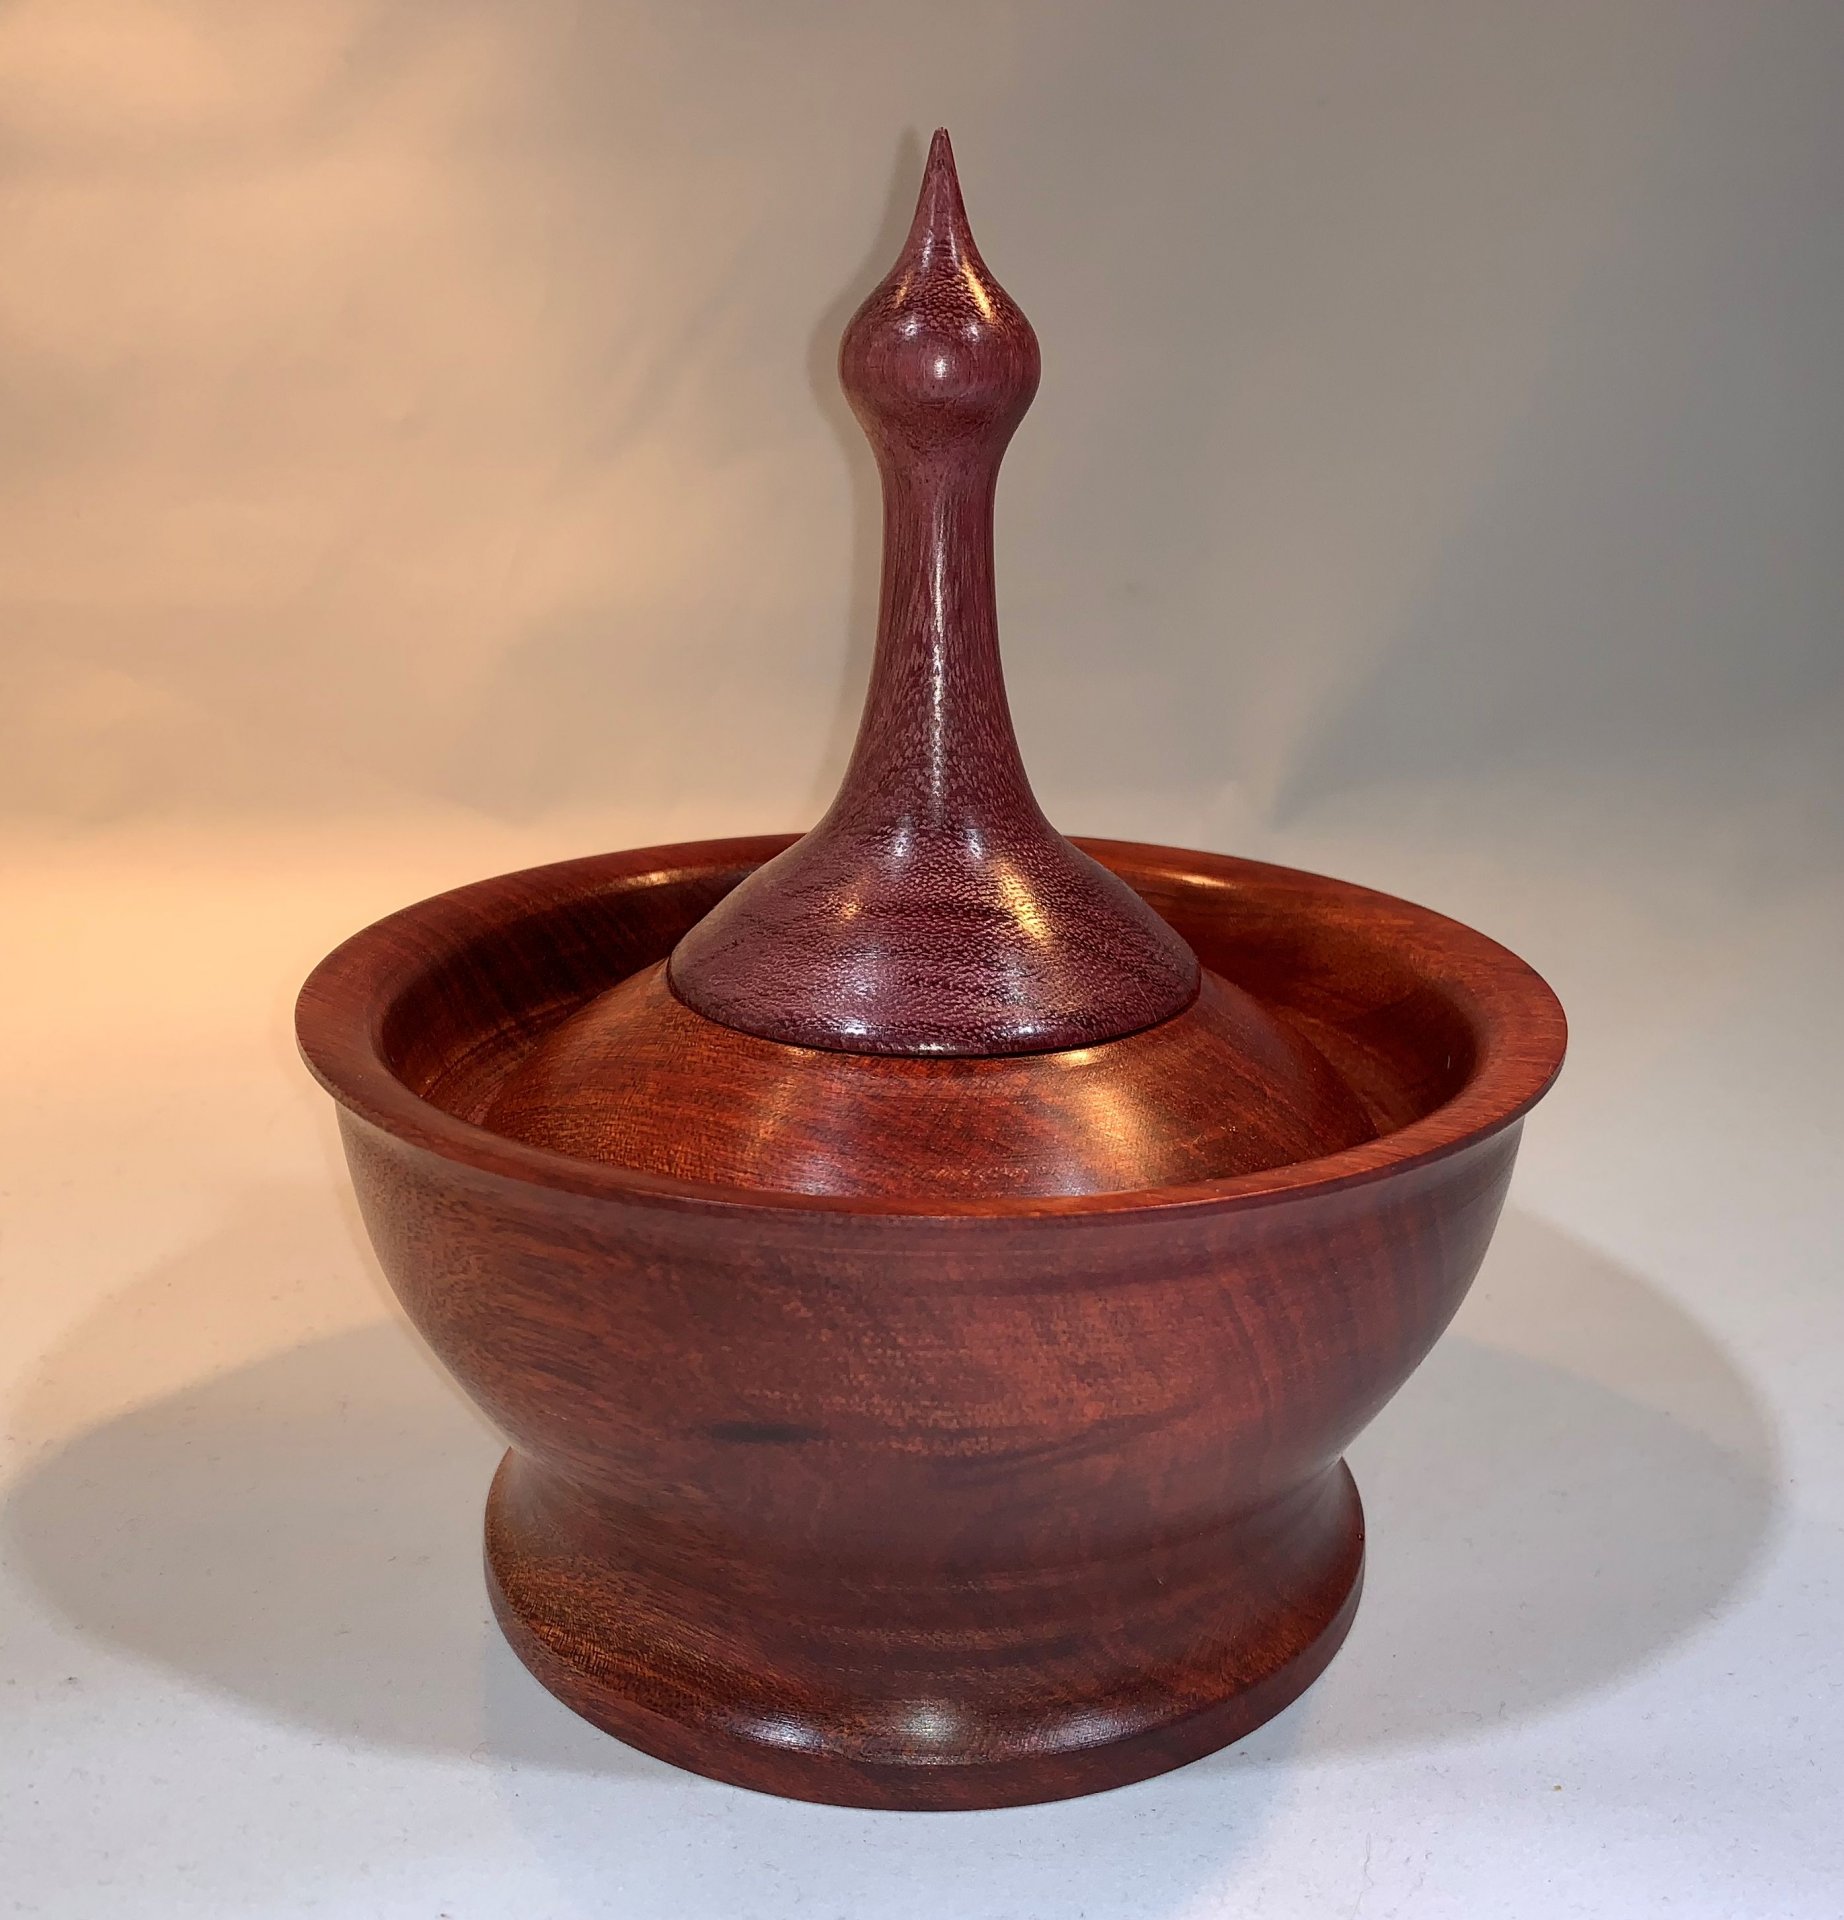 Lidded vessel made from Bloodwood and finial made from Purple Heart